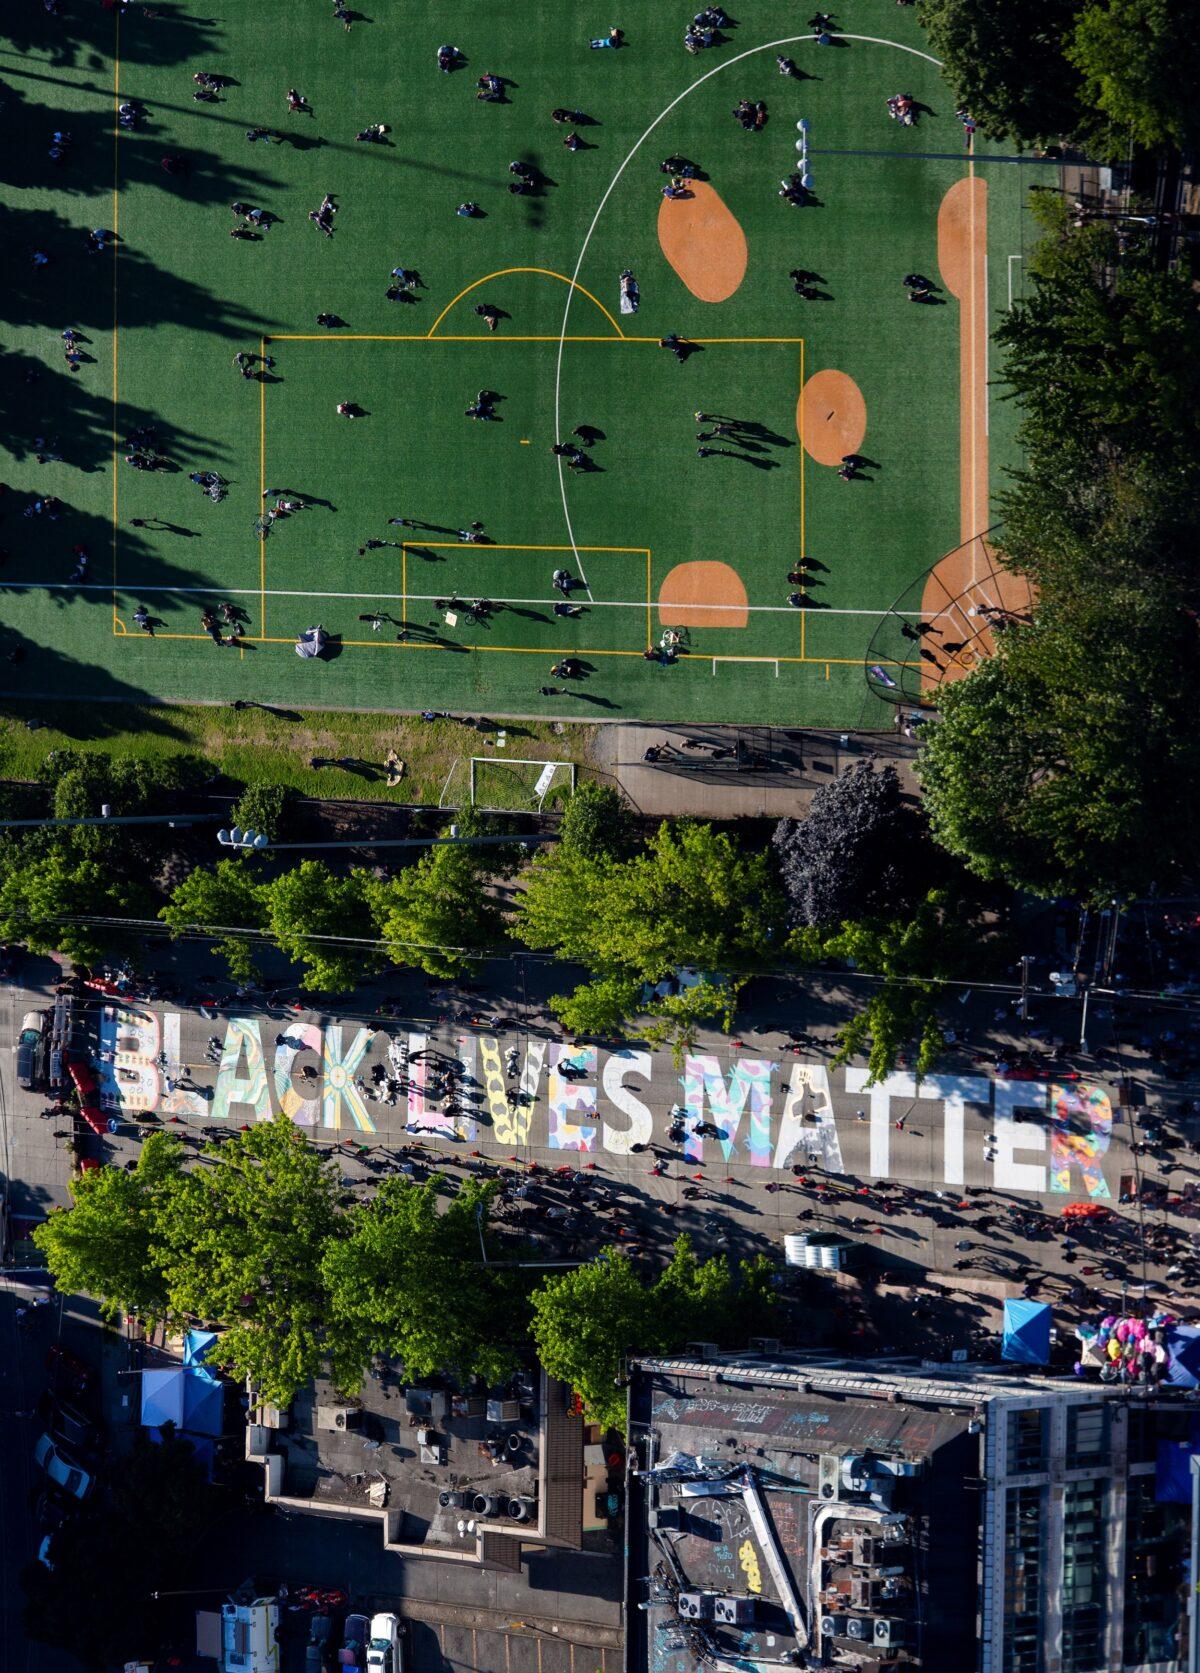 Artists fill in the letters of a "Black Lives Matter" mural on E. Pine Street as protesters establish what they call an autonomous zone near the Seattle Police Department's East Precinct in this aerial photo taken over Seattle, Wash., on June 11, 2020. (Lindsey Wasson/Reuters)